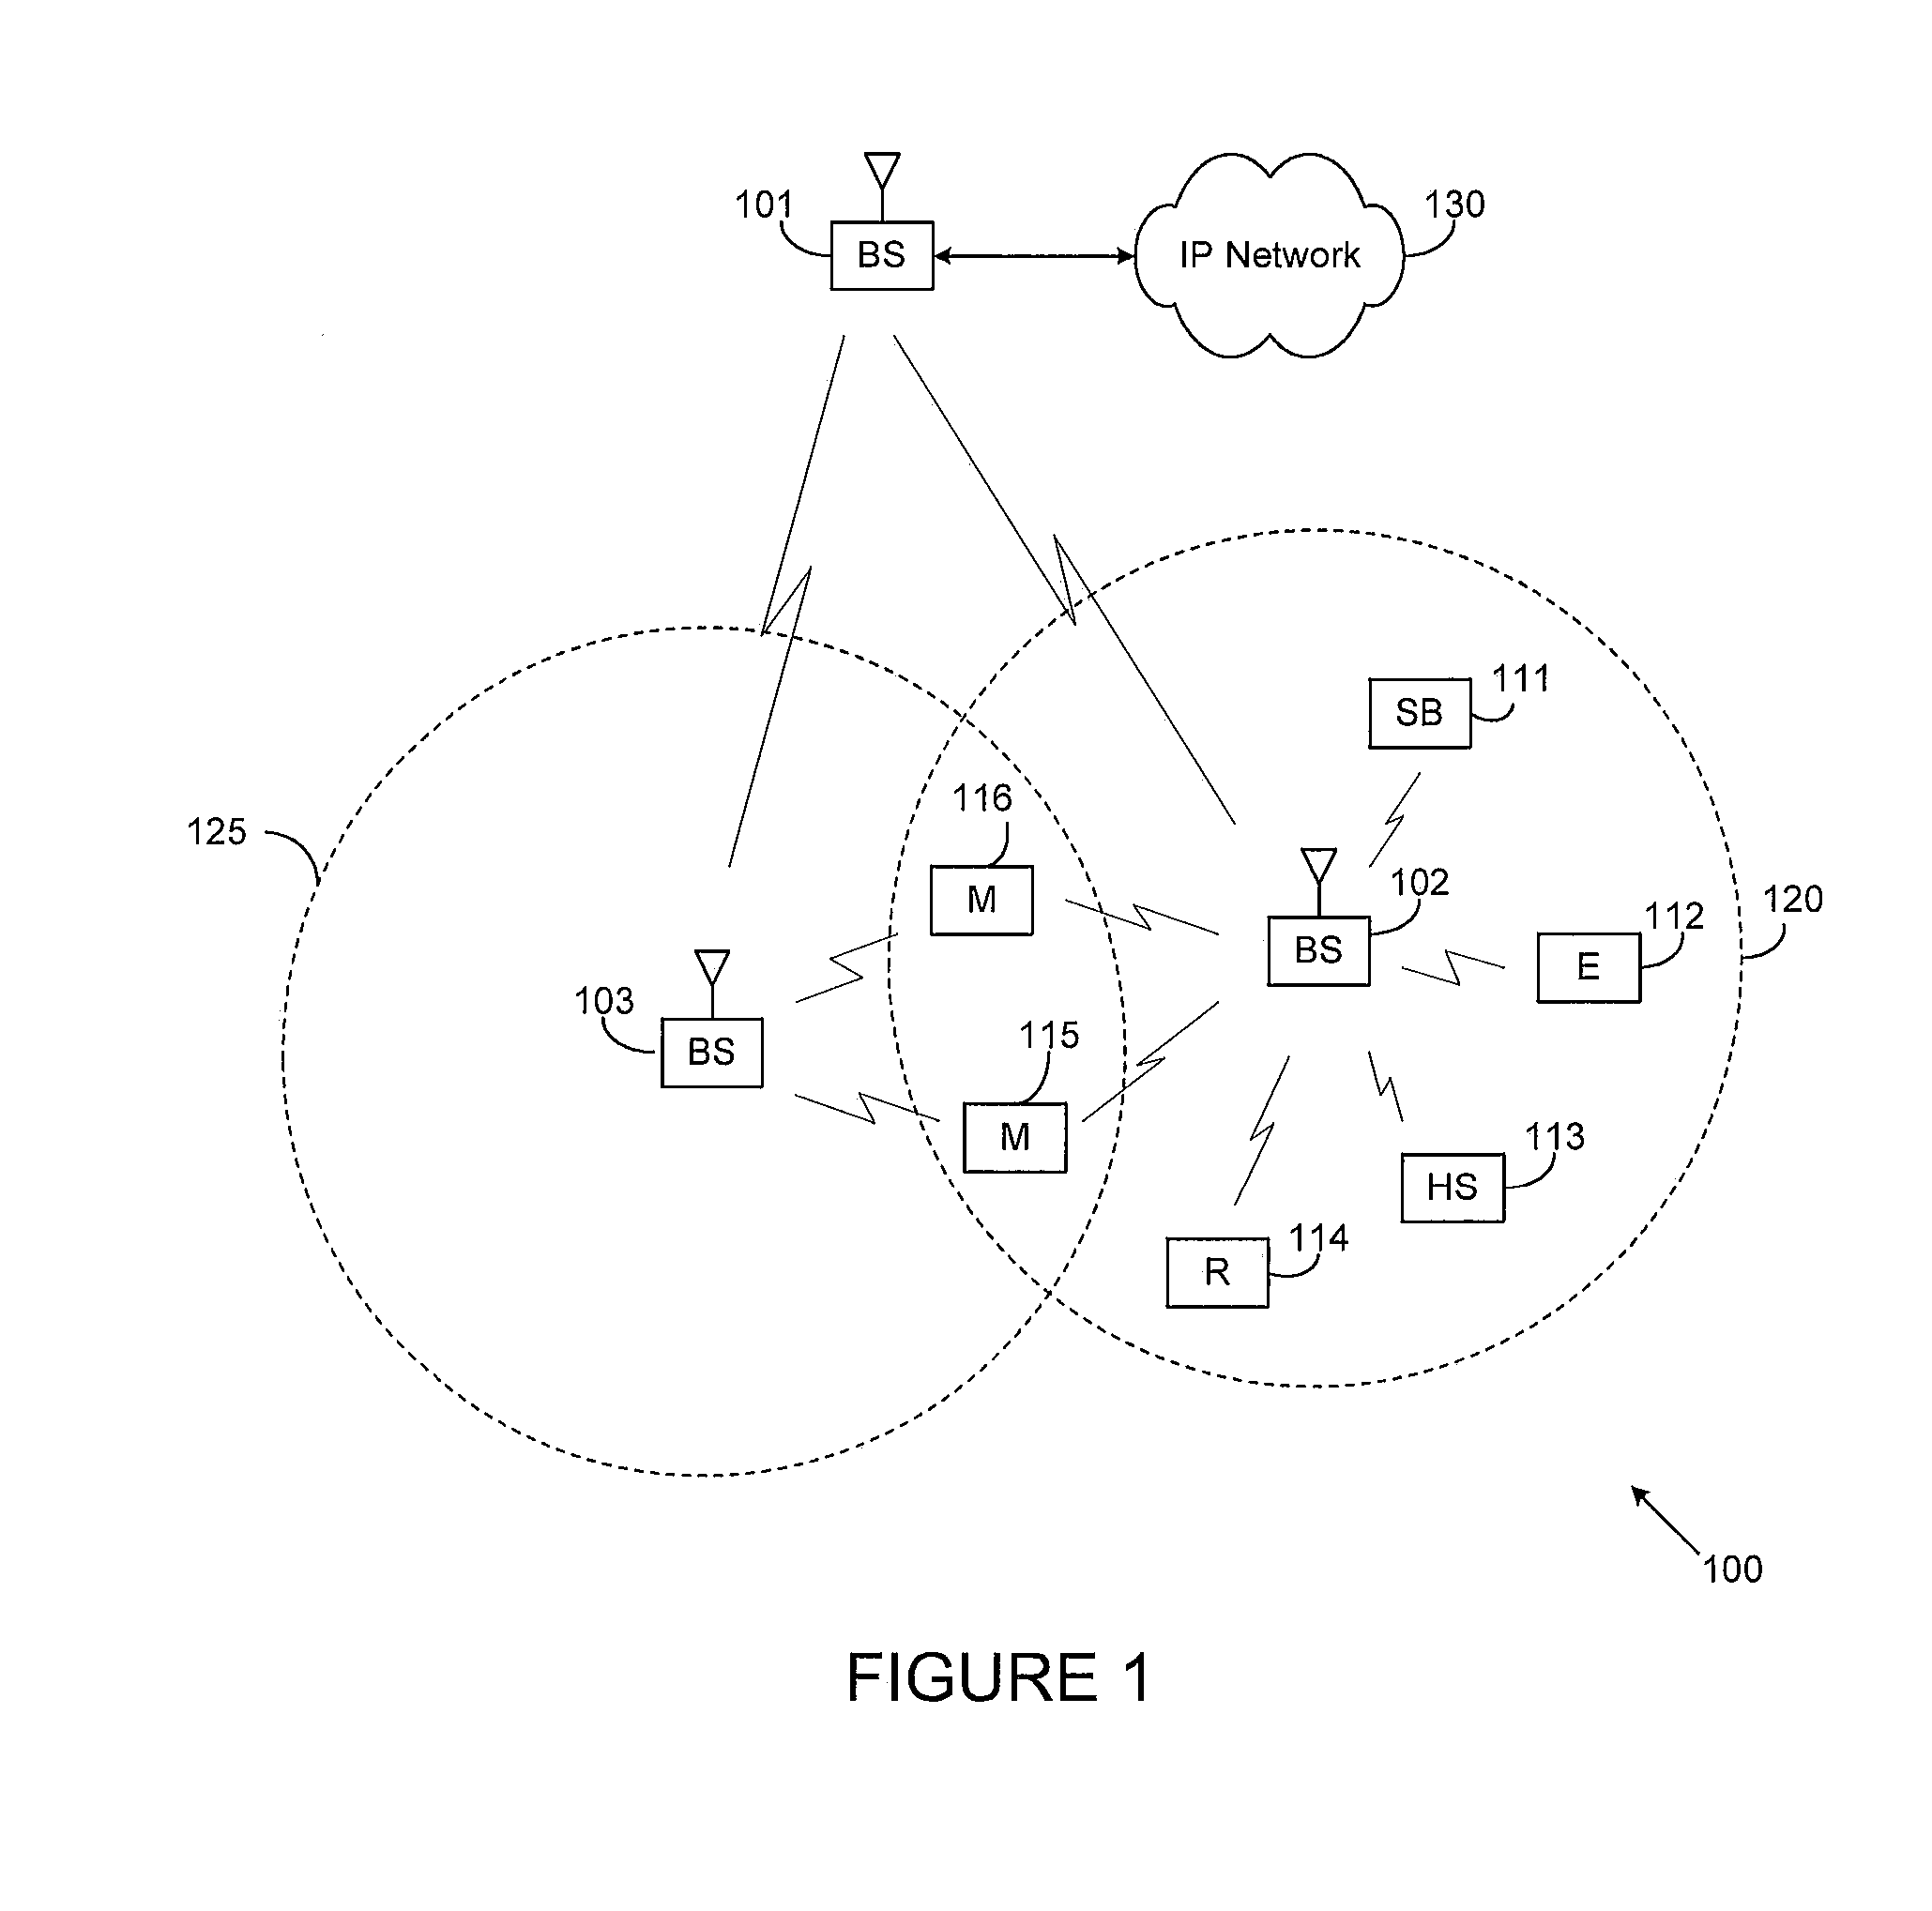 COORDINATED MULTIPOINT (CoMP) JOINT TRANSMISSION USING CHANNEL INFORMATION FEEDBACK AND HIGHER RANK DEDICATED BEAM-FORMING